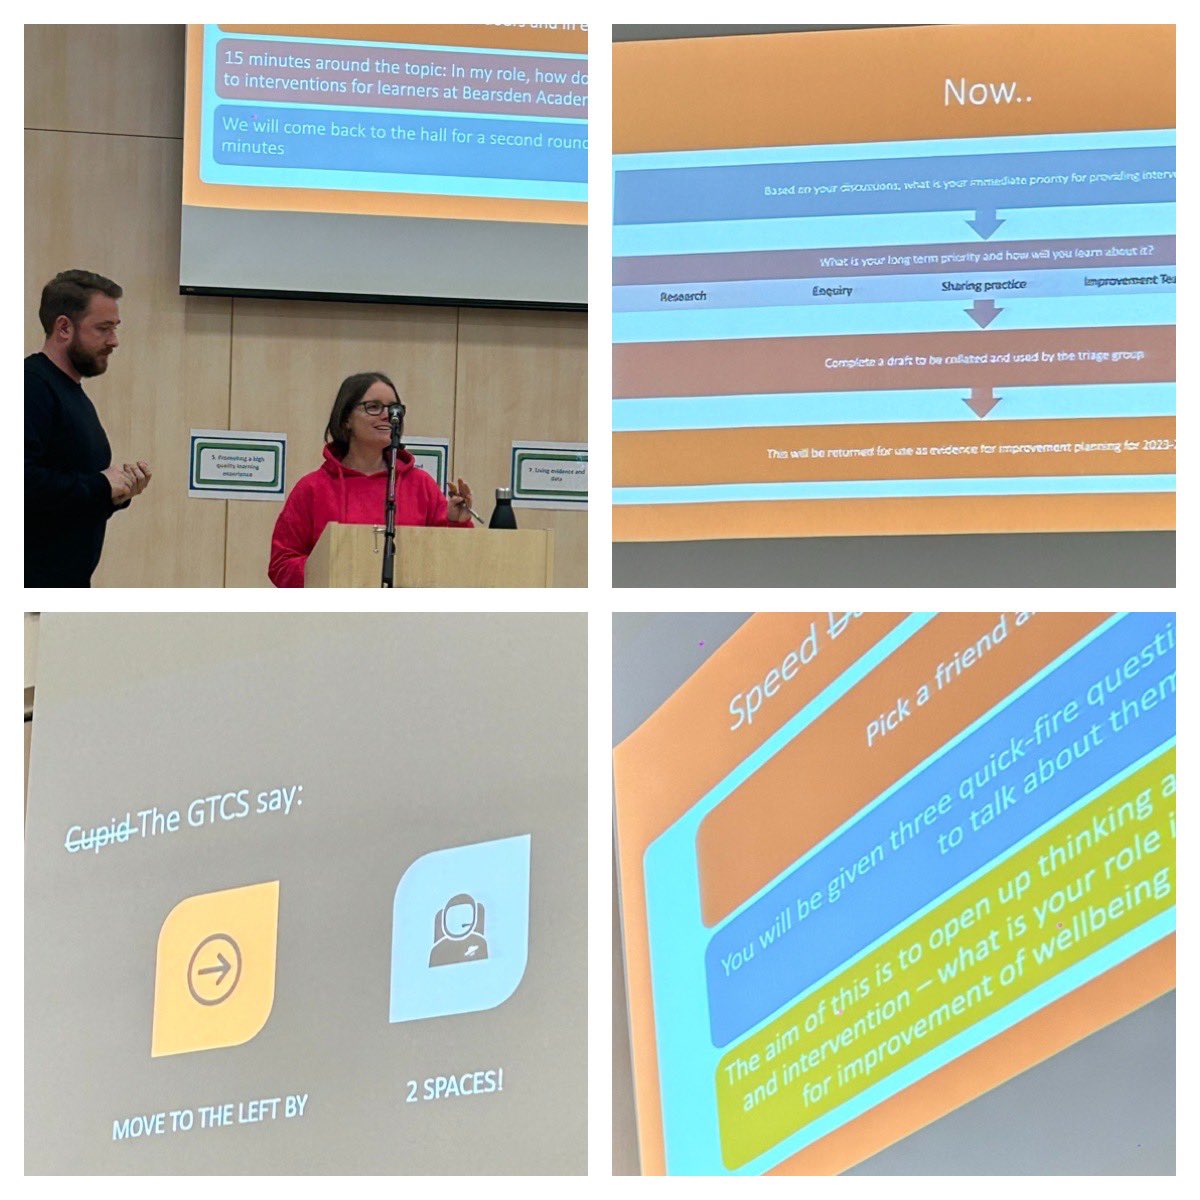 #TimeToReflect #Interventions4Equity #TRIAGE #COVIDRecovery #ProfessionalDialogue Thanks to @JanetWestwater & Mr Sloan 4 leading us through #reflective #dialogue while #walking & #talking. #GoldInset